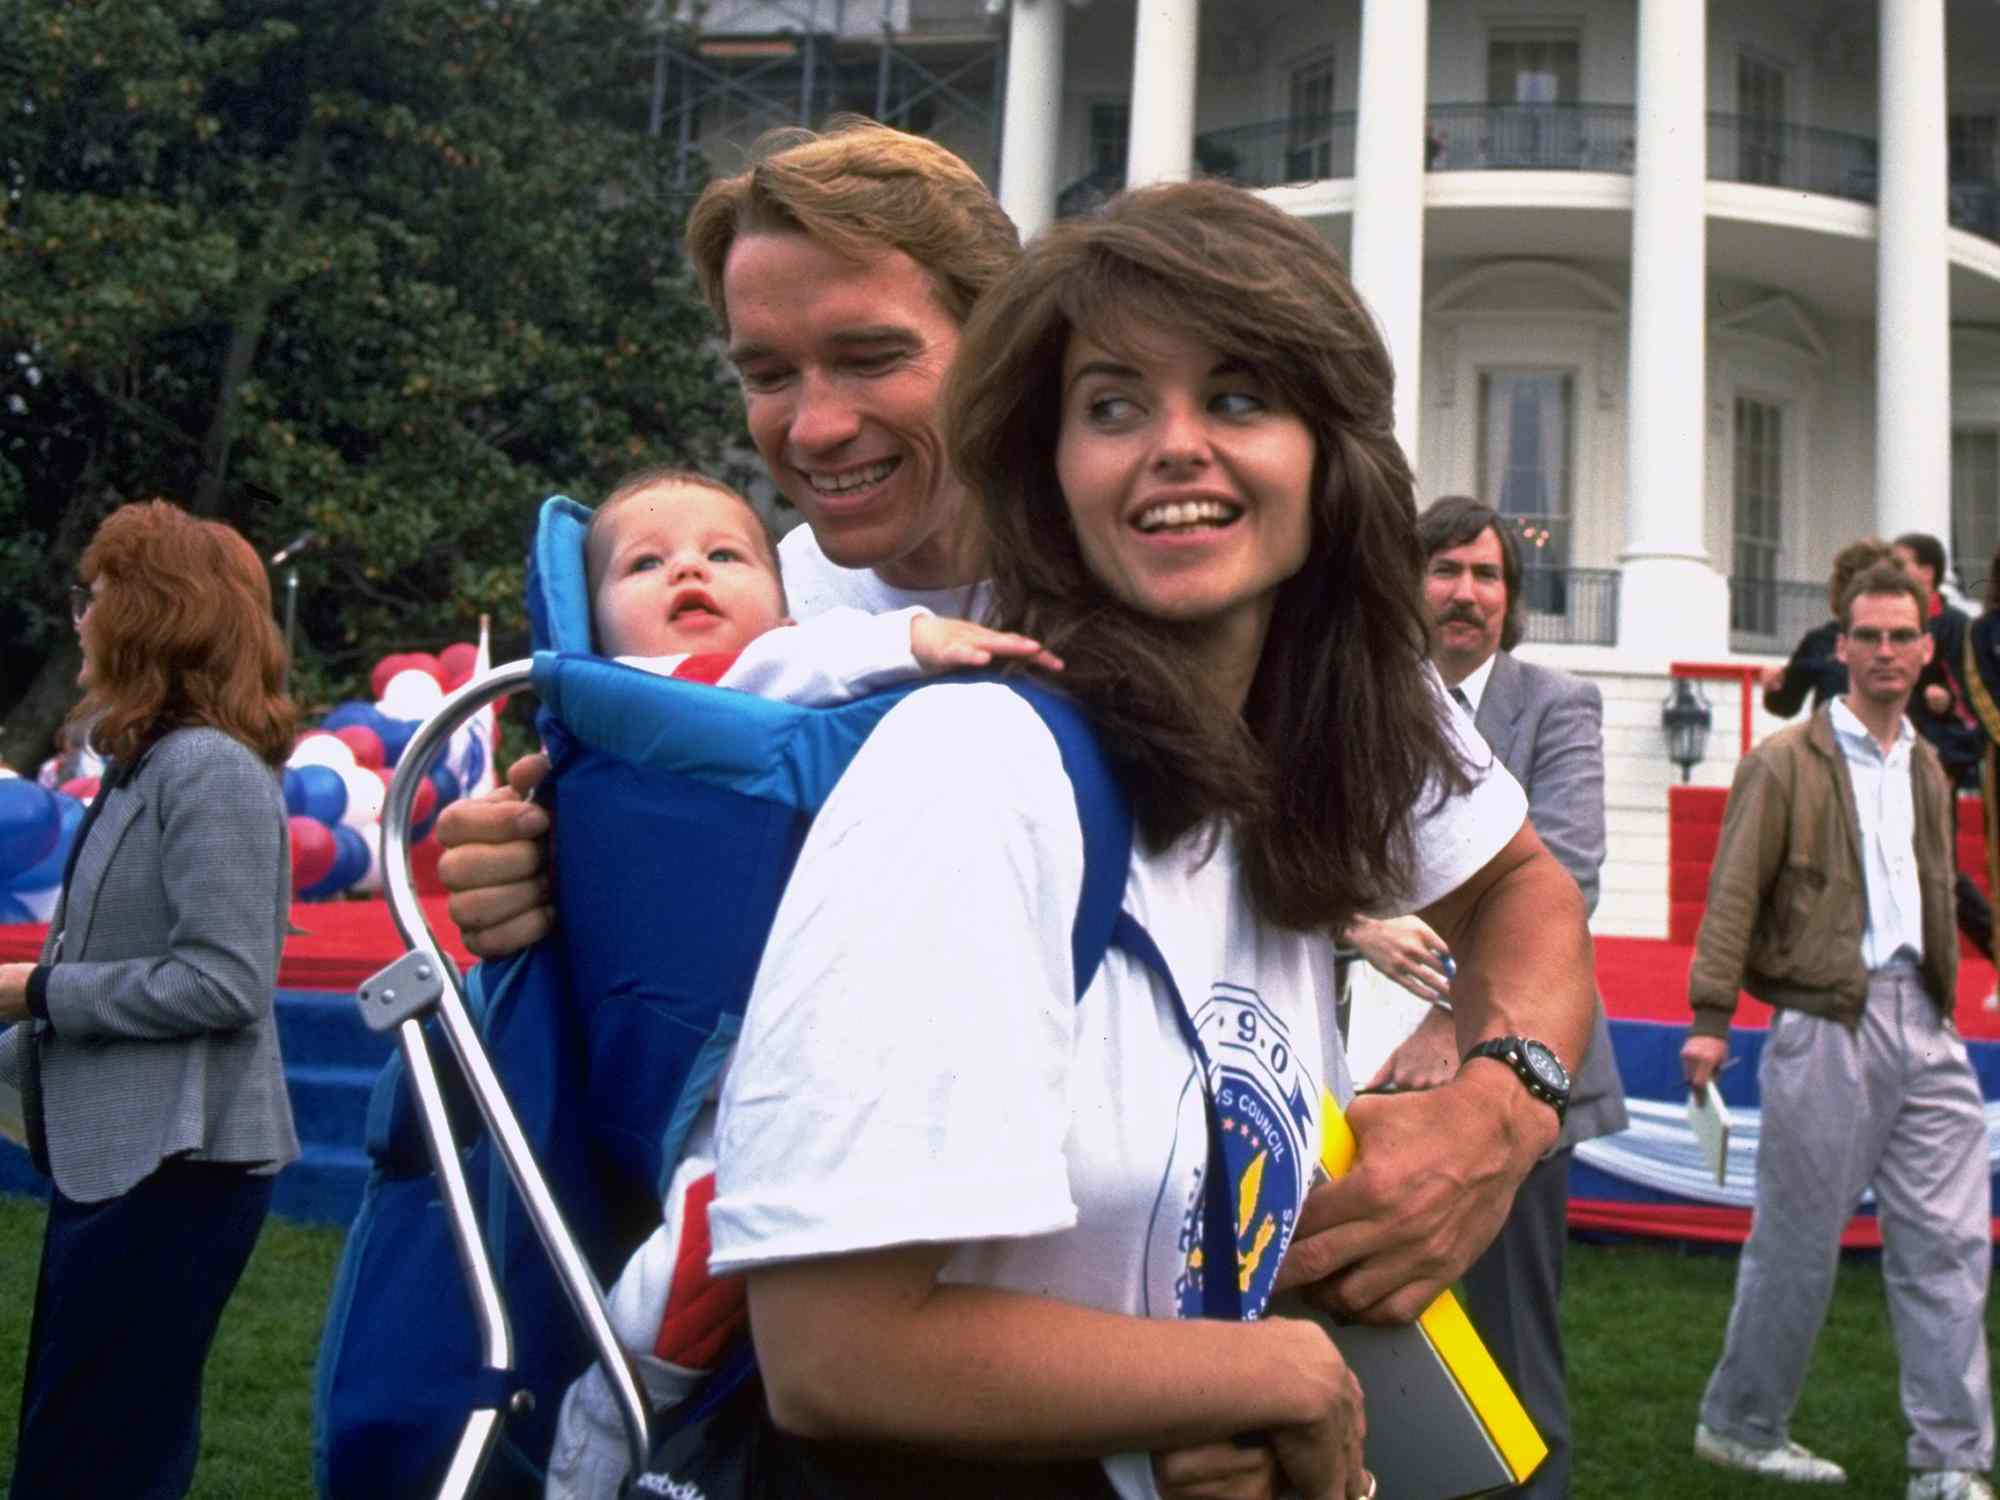 Arnold Schwarzenegger w. wife Maria Shriver & daughter Katherine Eunice on WH lawn for Great American Workout